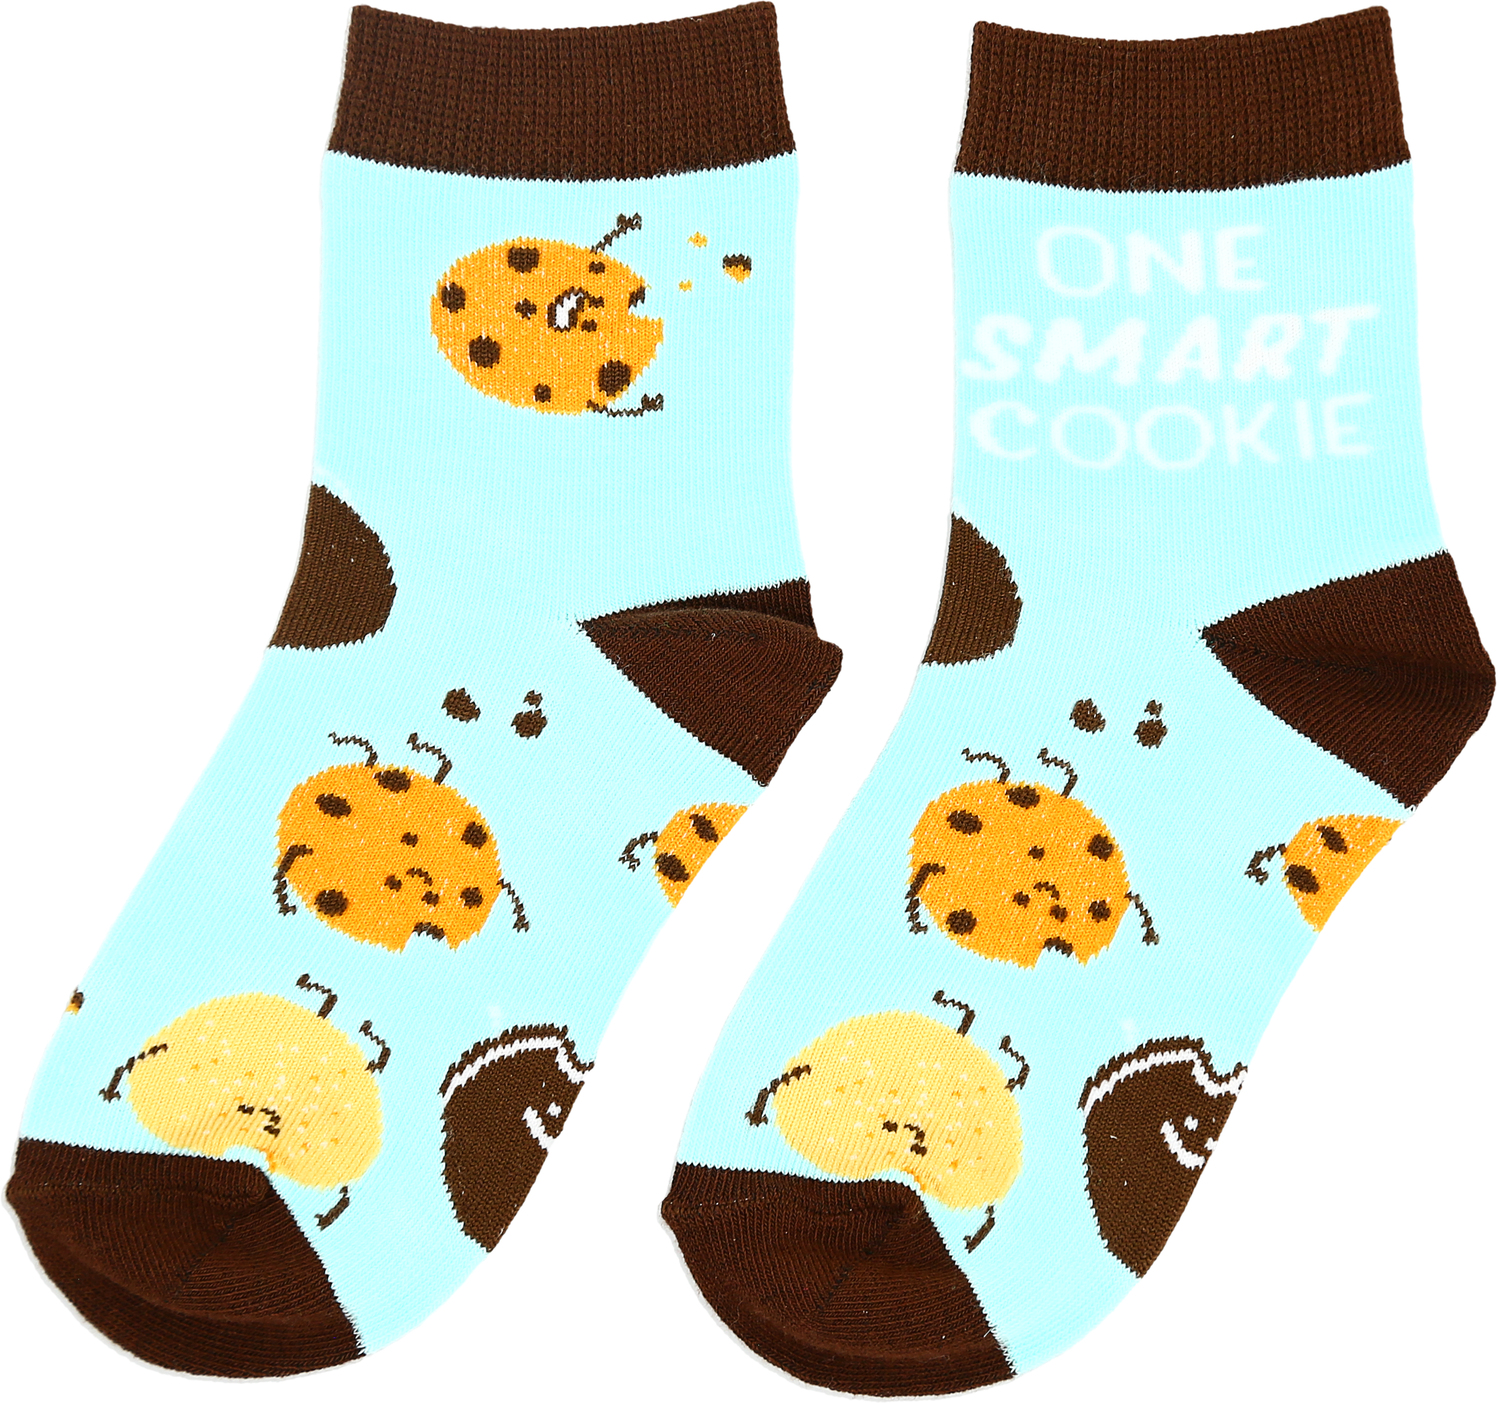 Cookies by Late Night Snacks - Cookies - S/M Youth Cotton Blend Crew Socks